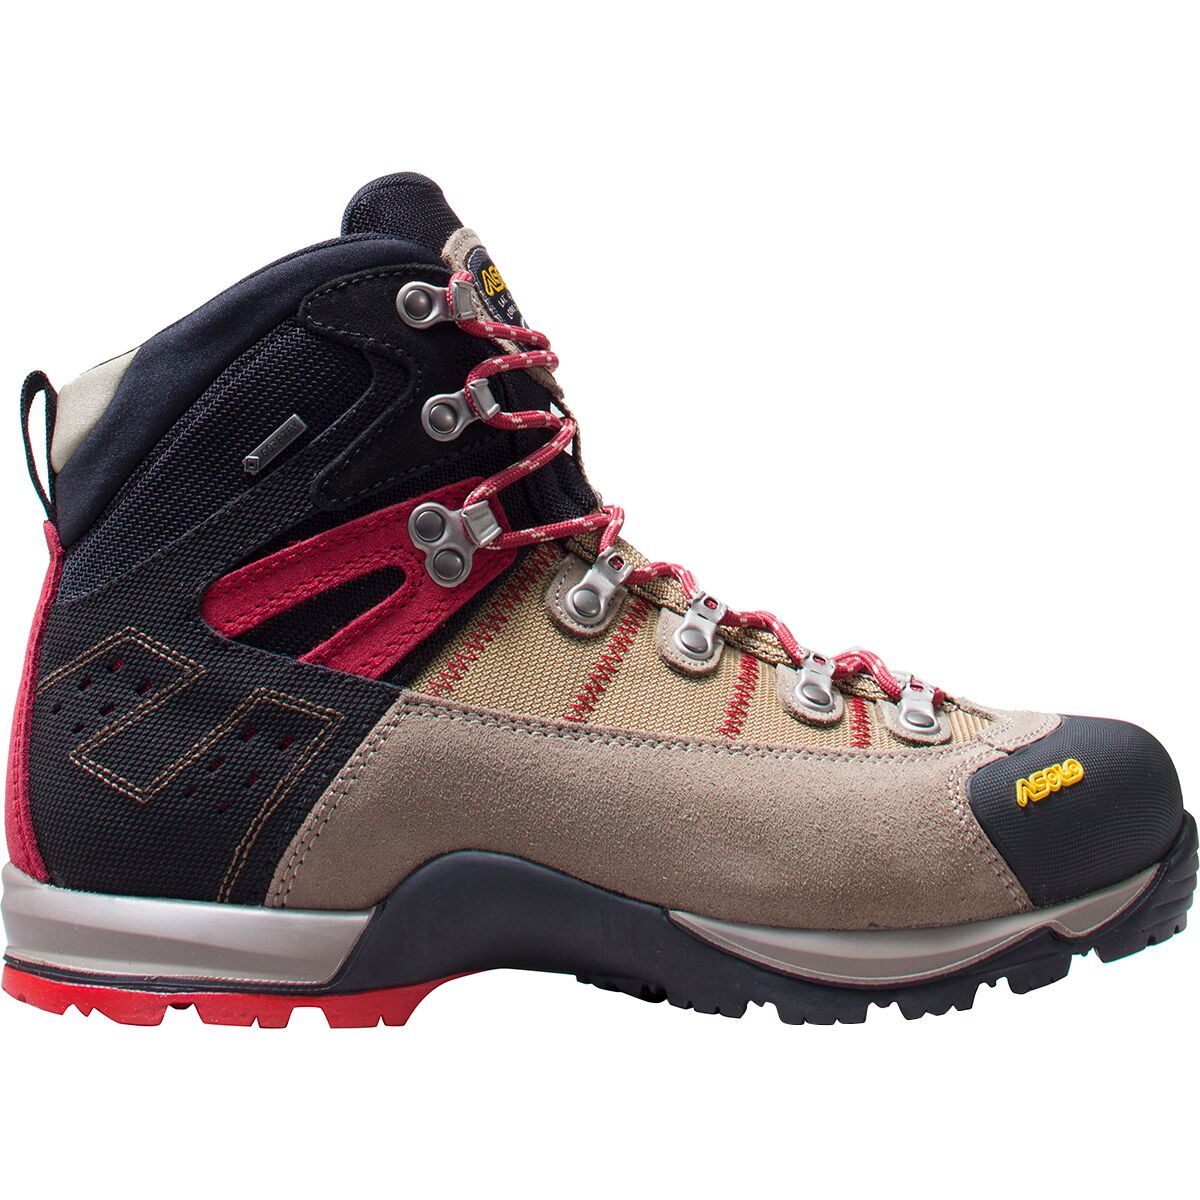 Asolo Fugitive GTX Hiking Boot - Wide 